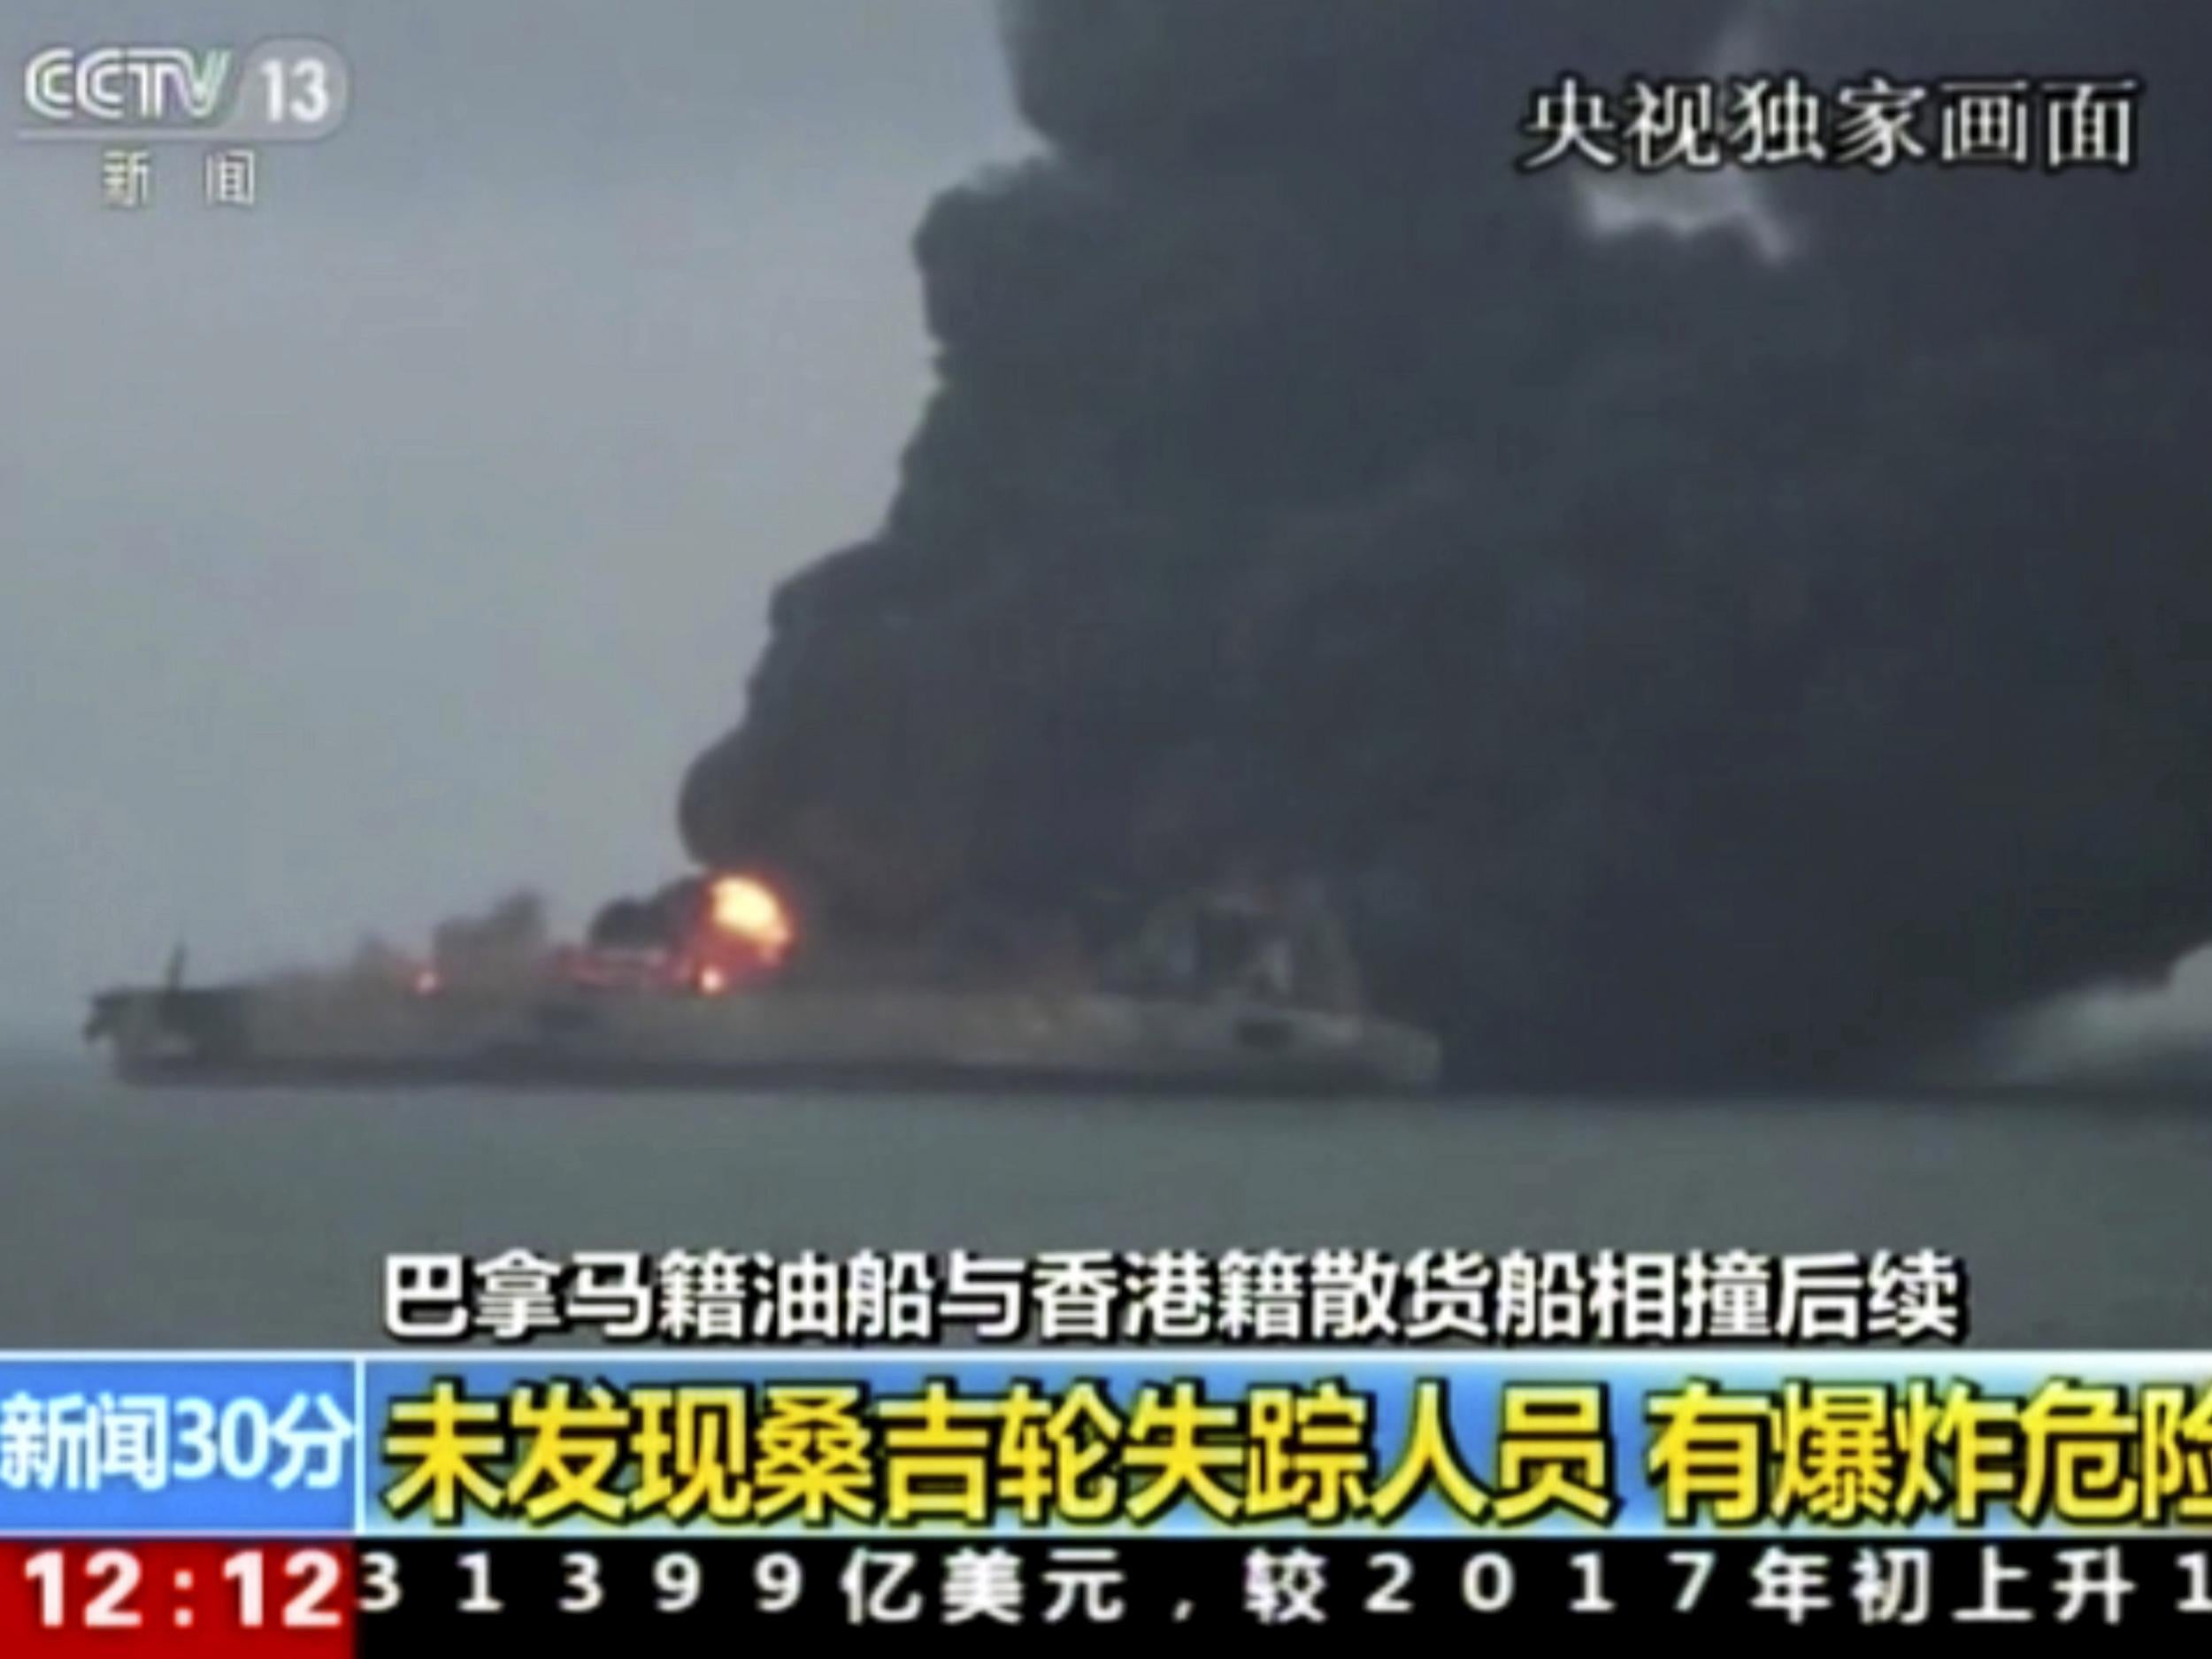 The Panama-registered tanker "Sanchi" ablaze after a collision with a Hong Kong-registered freighter off China's eastern coast